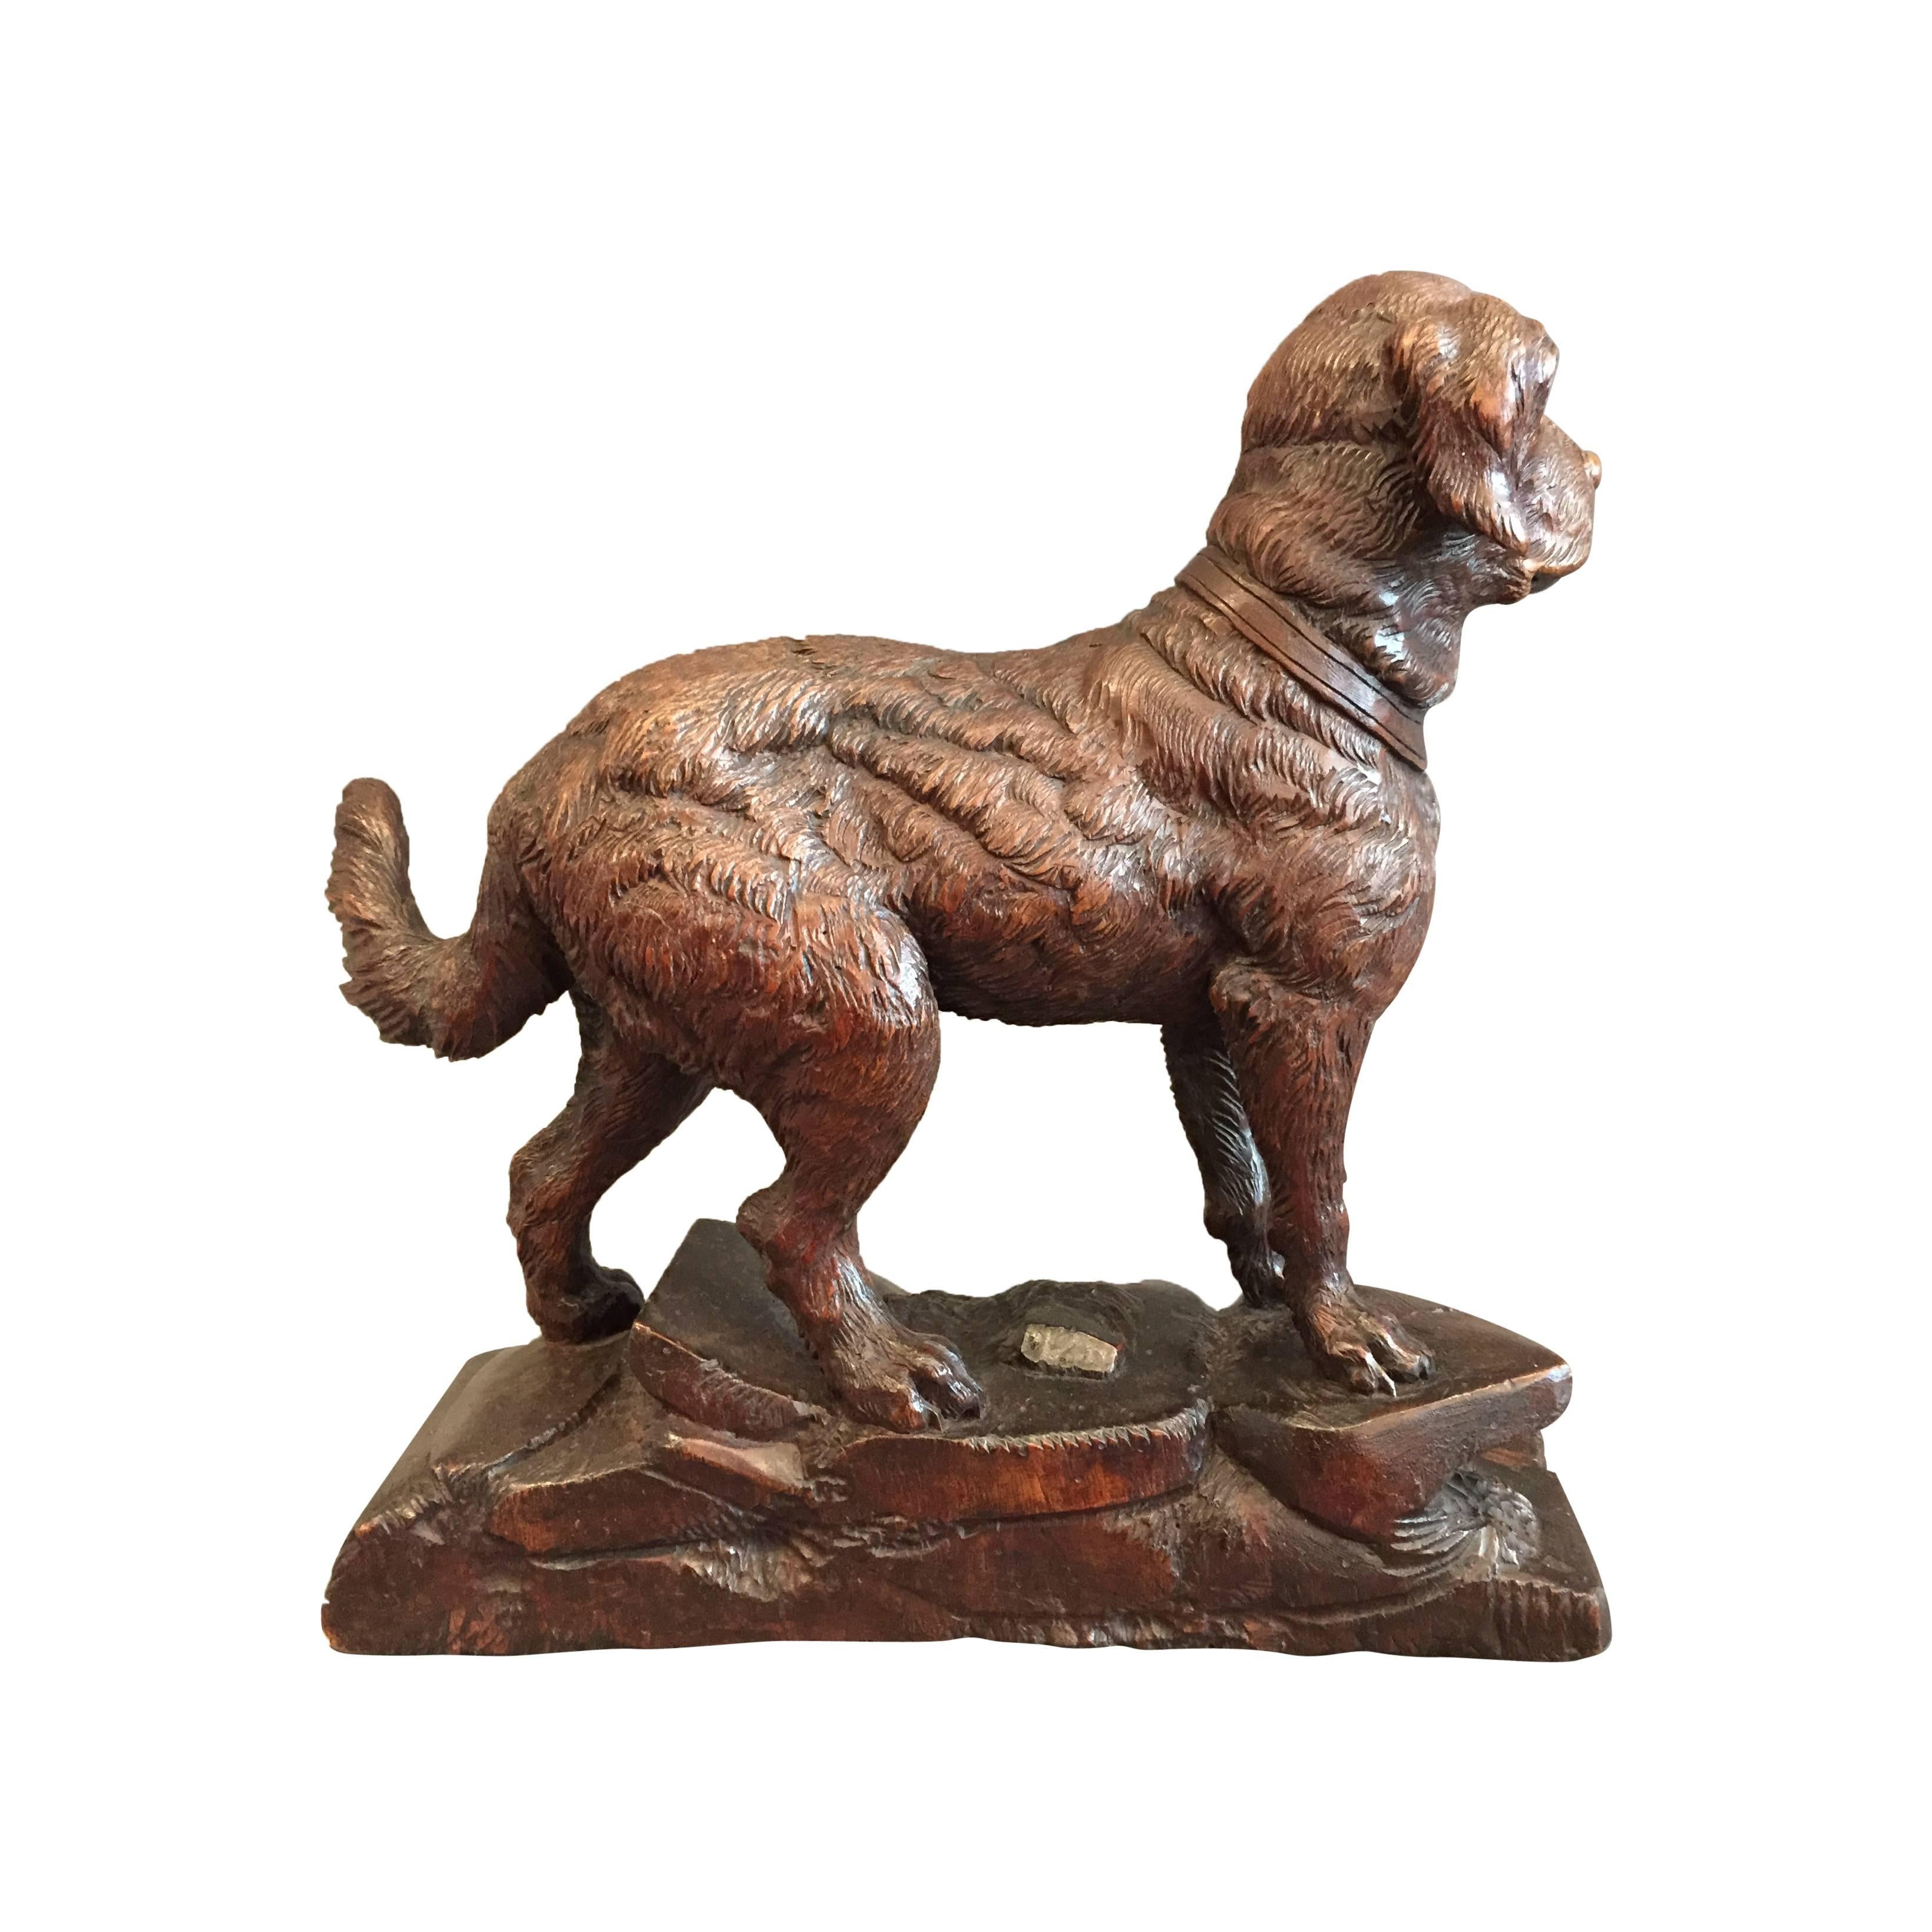 A beautiful walnut Swiss Black Forest carving, modeled after an alert dog standing on rocks.